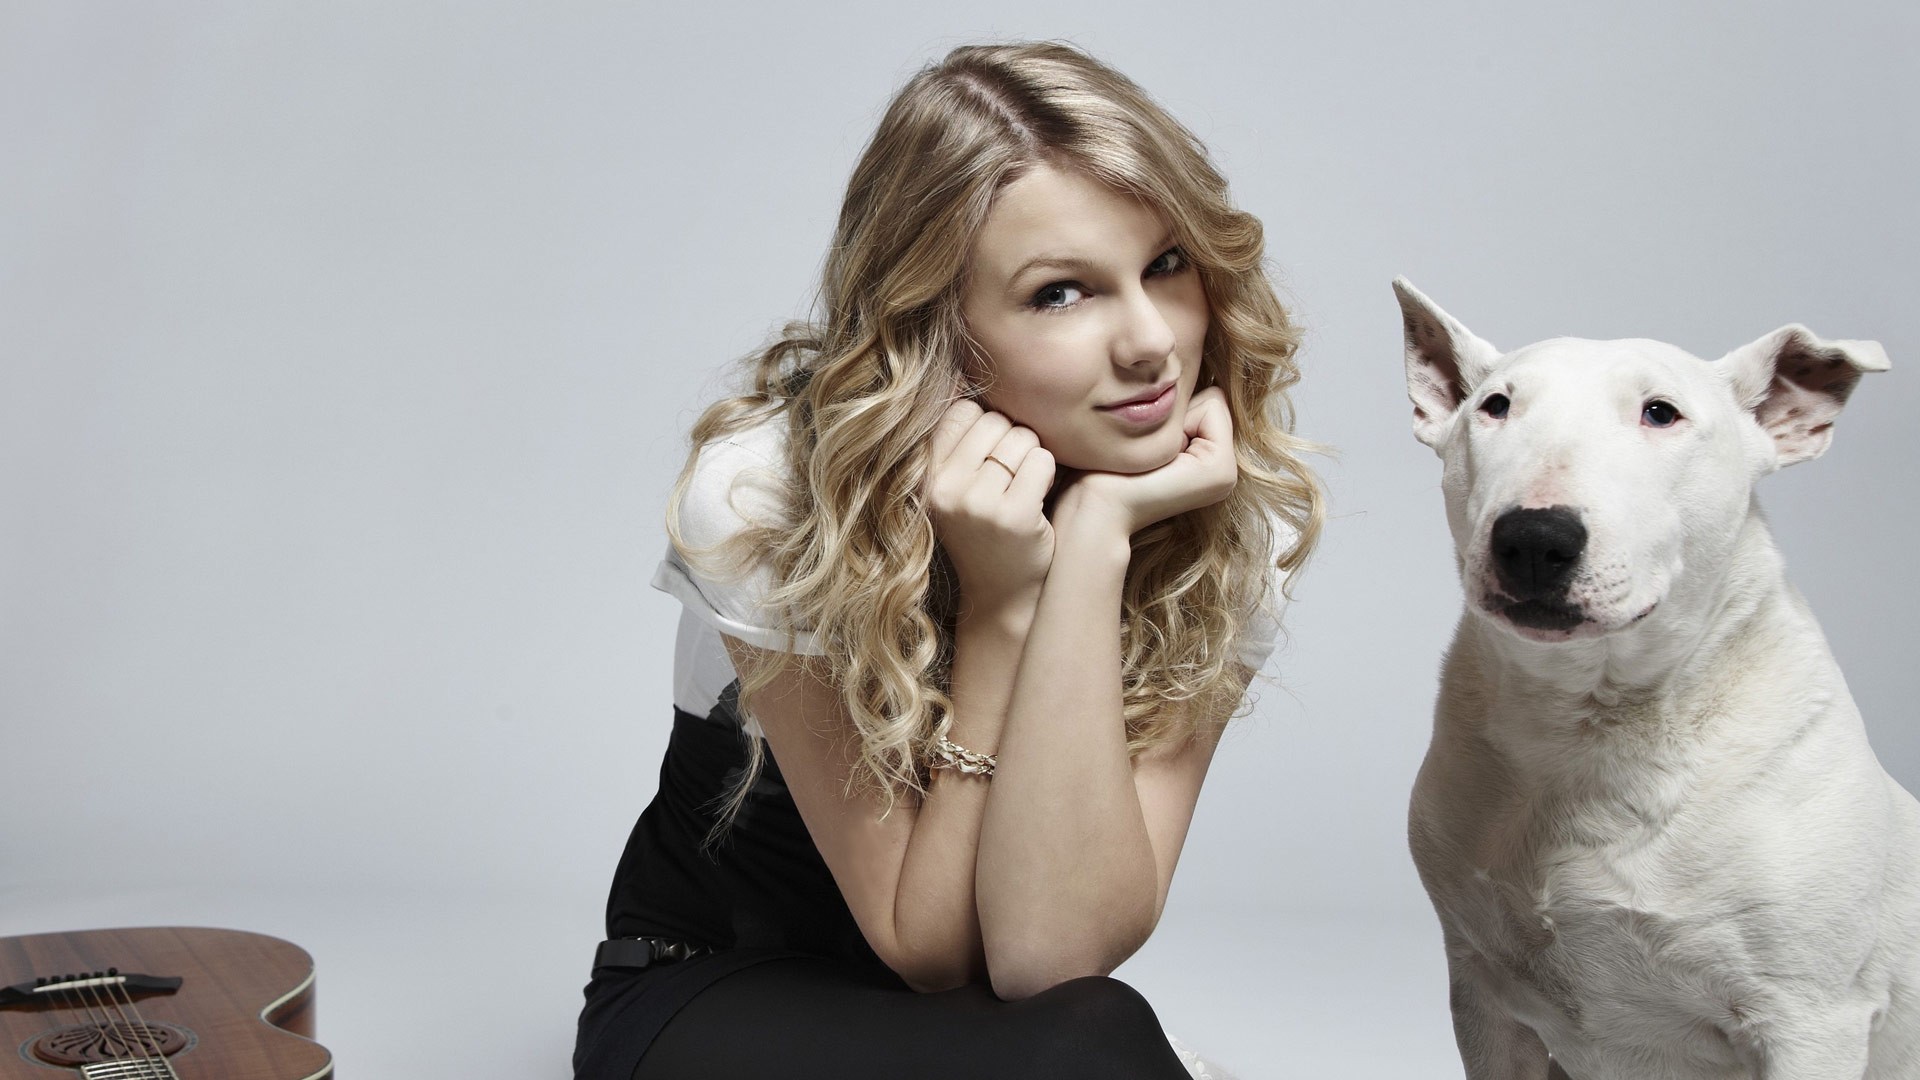 Taylor Swift Singer Women Dog Women With Dogs 1920x1080